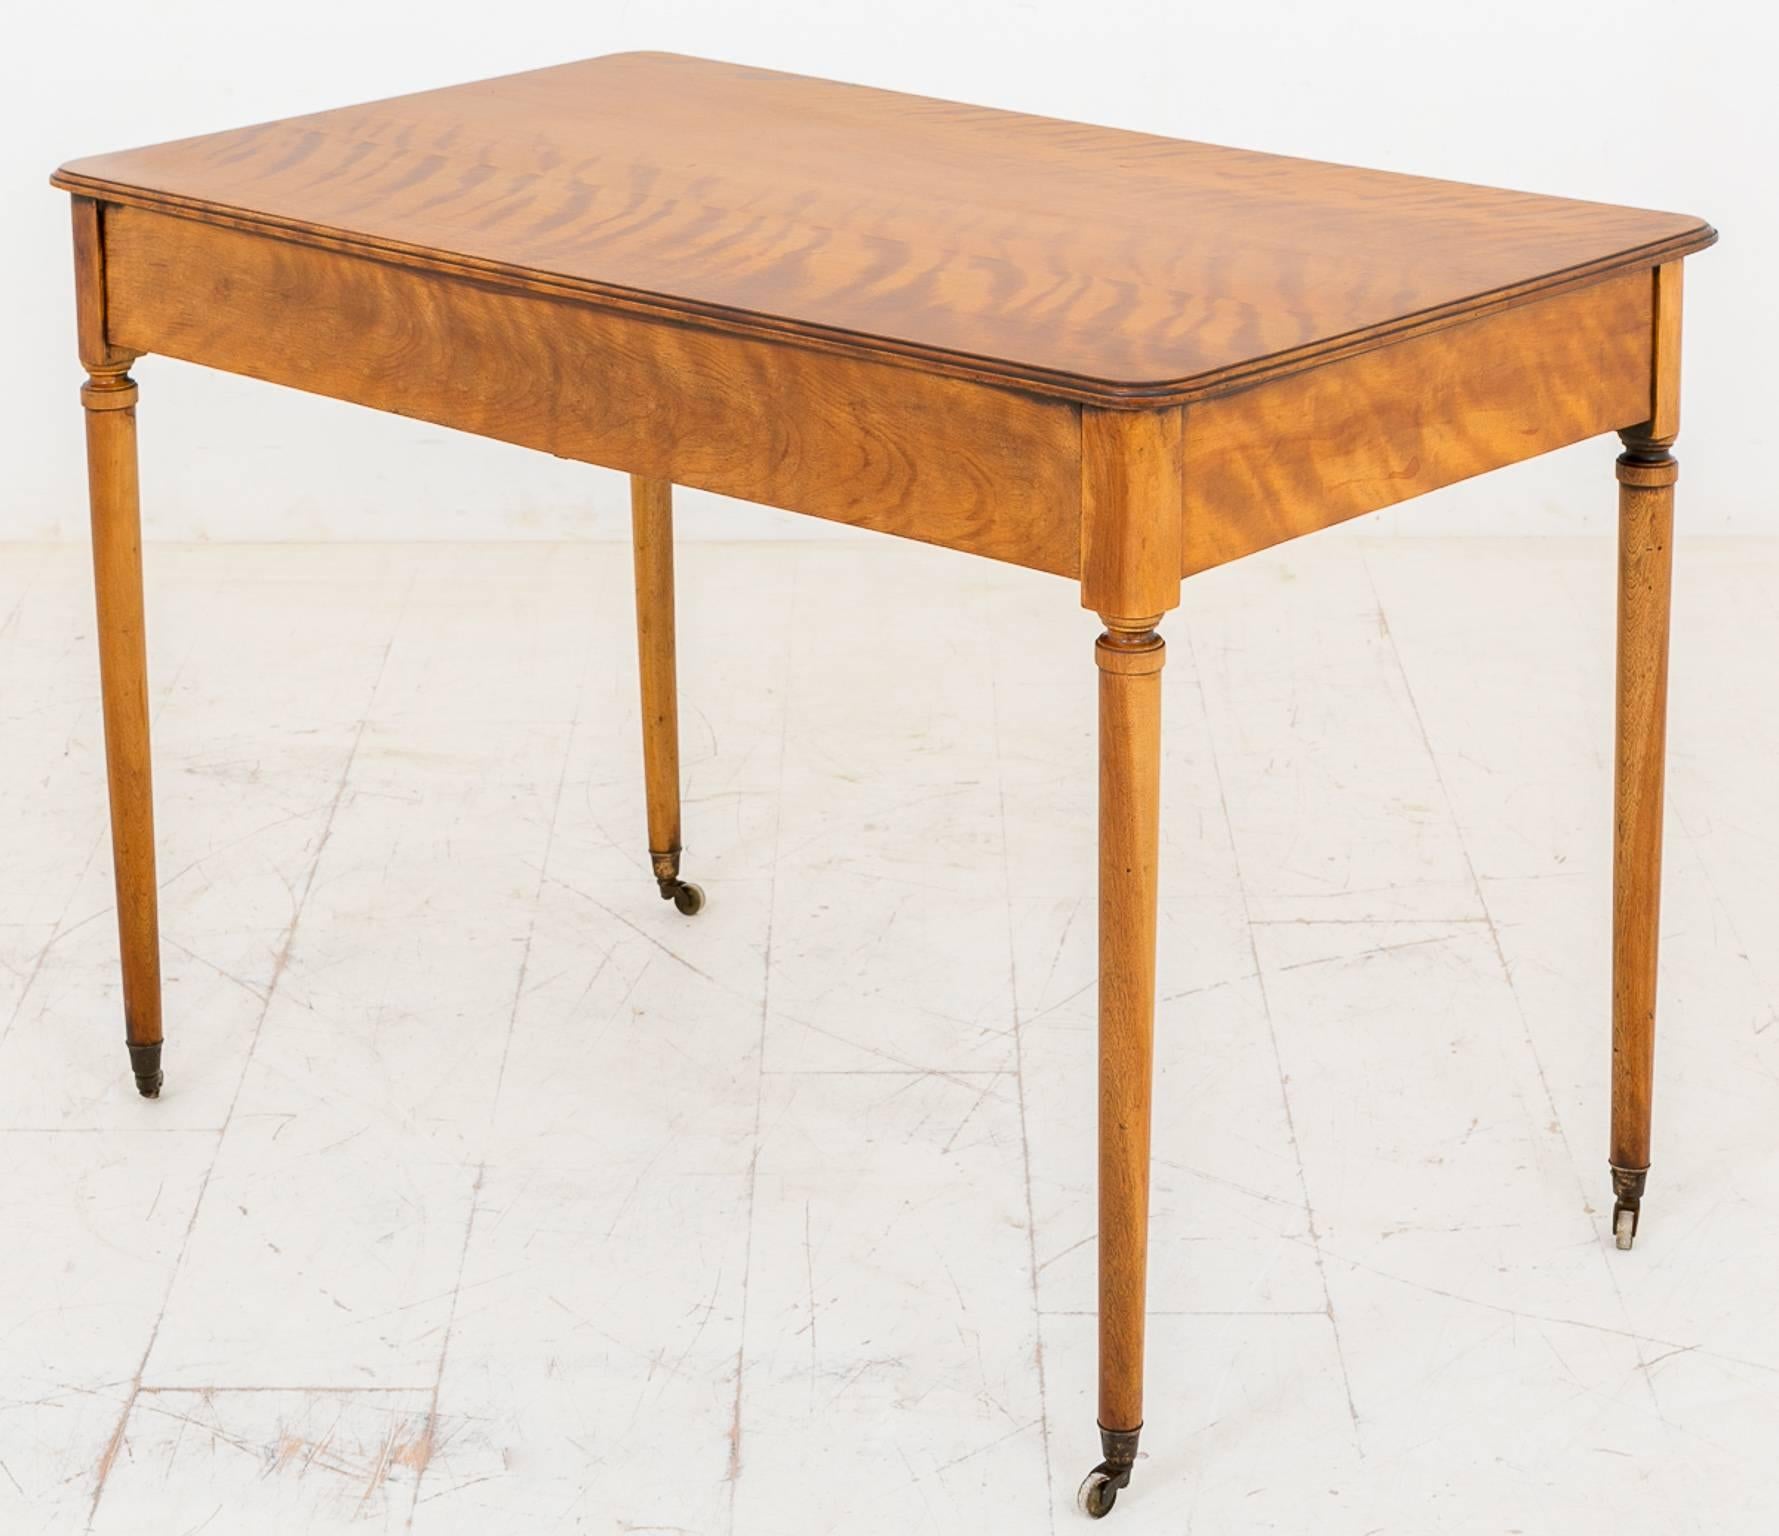 Early Victorian satin birch side table, standing on brass castors and very elegant turned legs.
The two mahogany lined drawers with original handles.
The top featuring lovely figured veneers.
This piece is freestanding.

Size:
Height 27